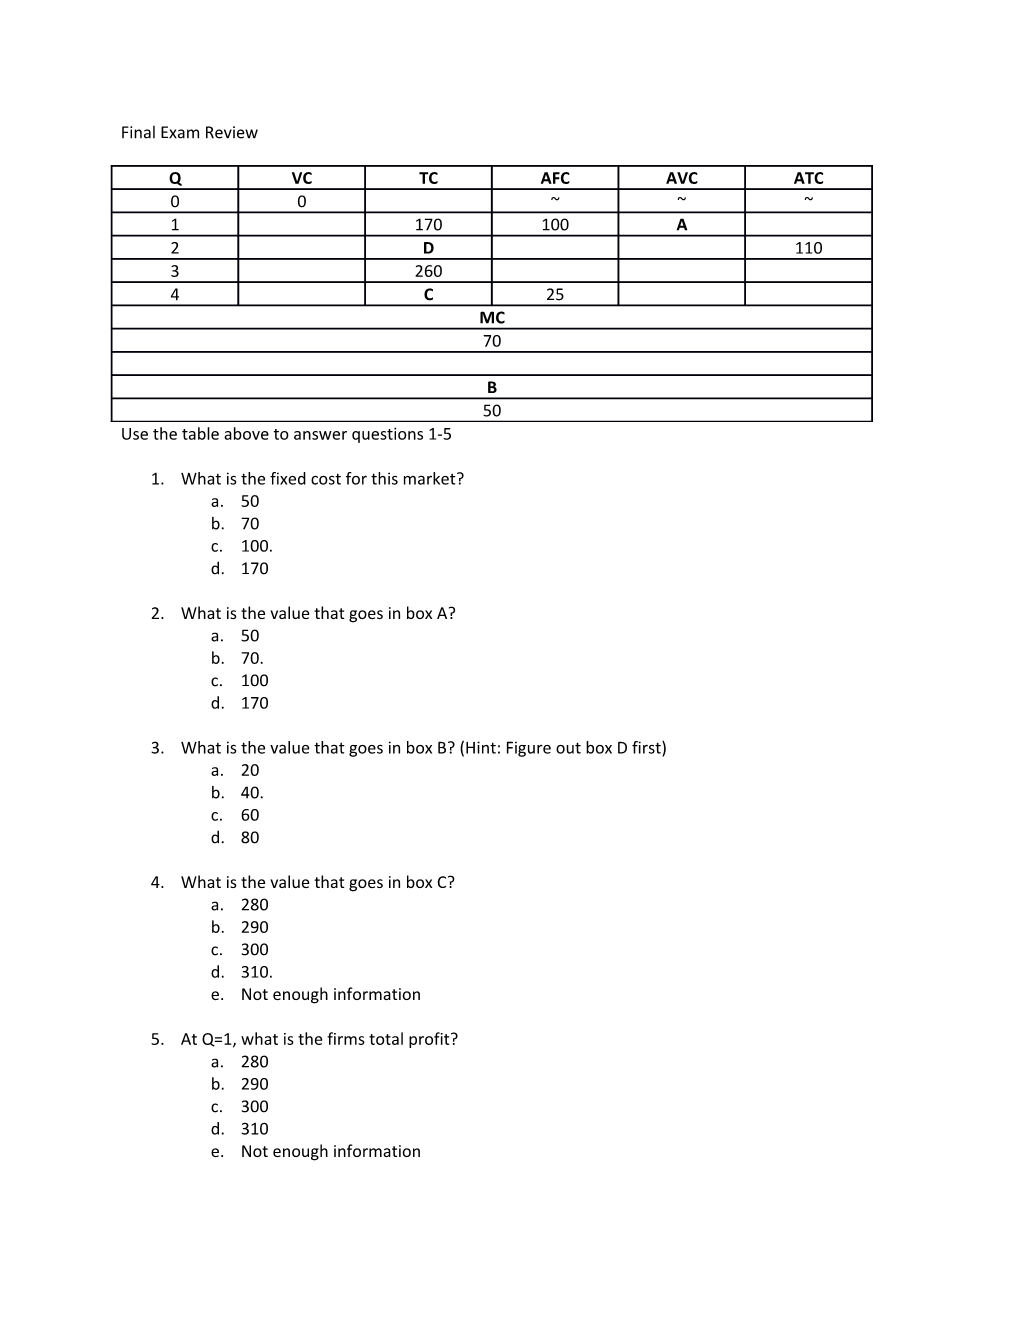 Use the Table Above to Answer Questions 1-5